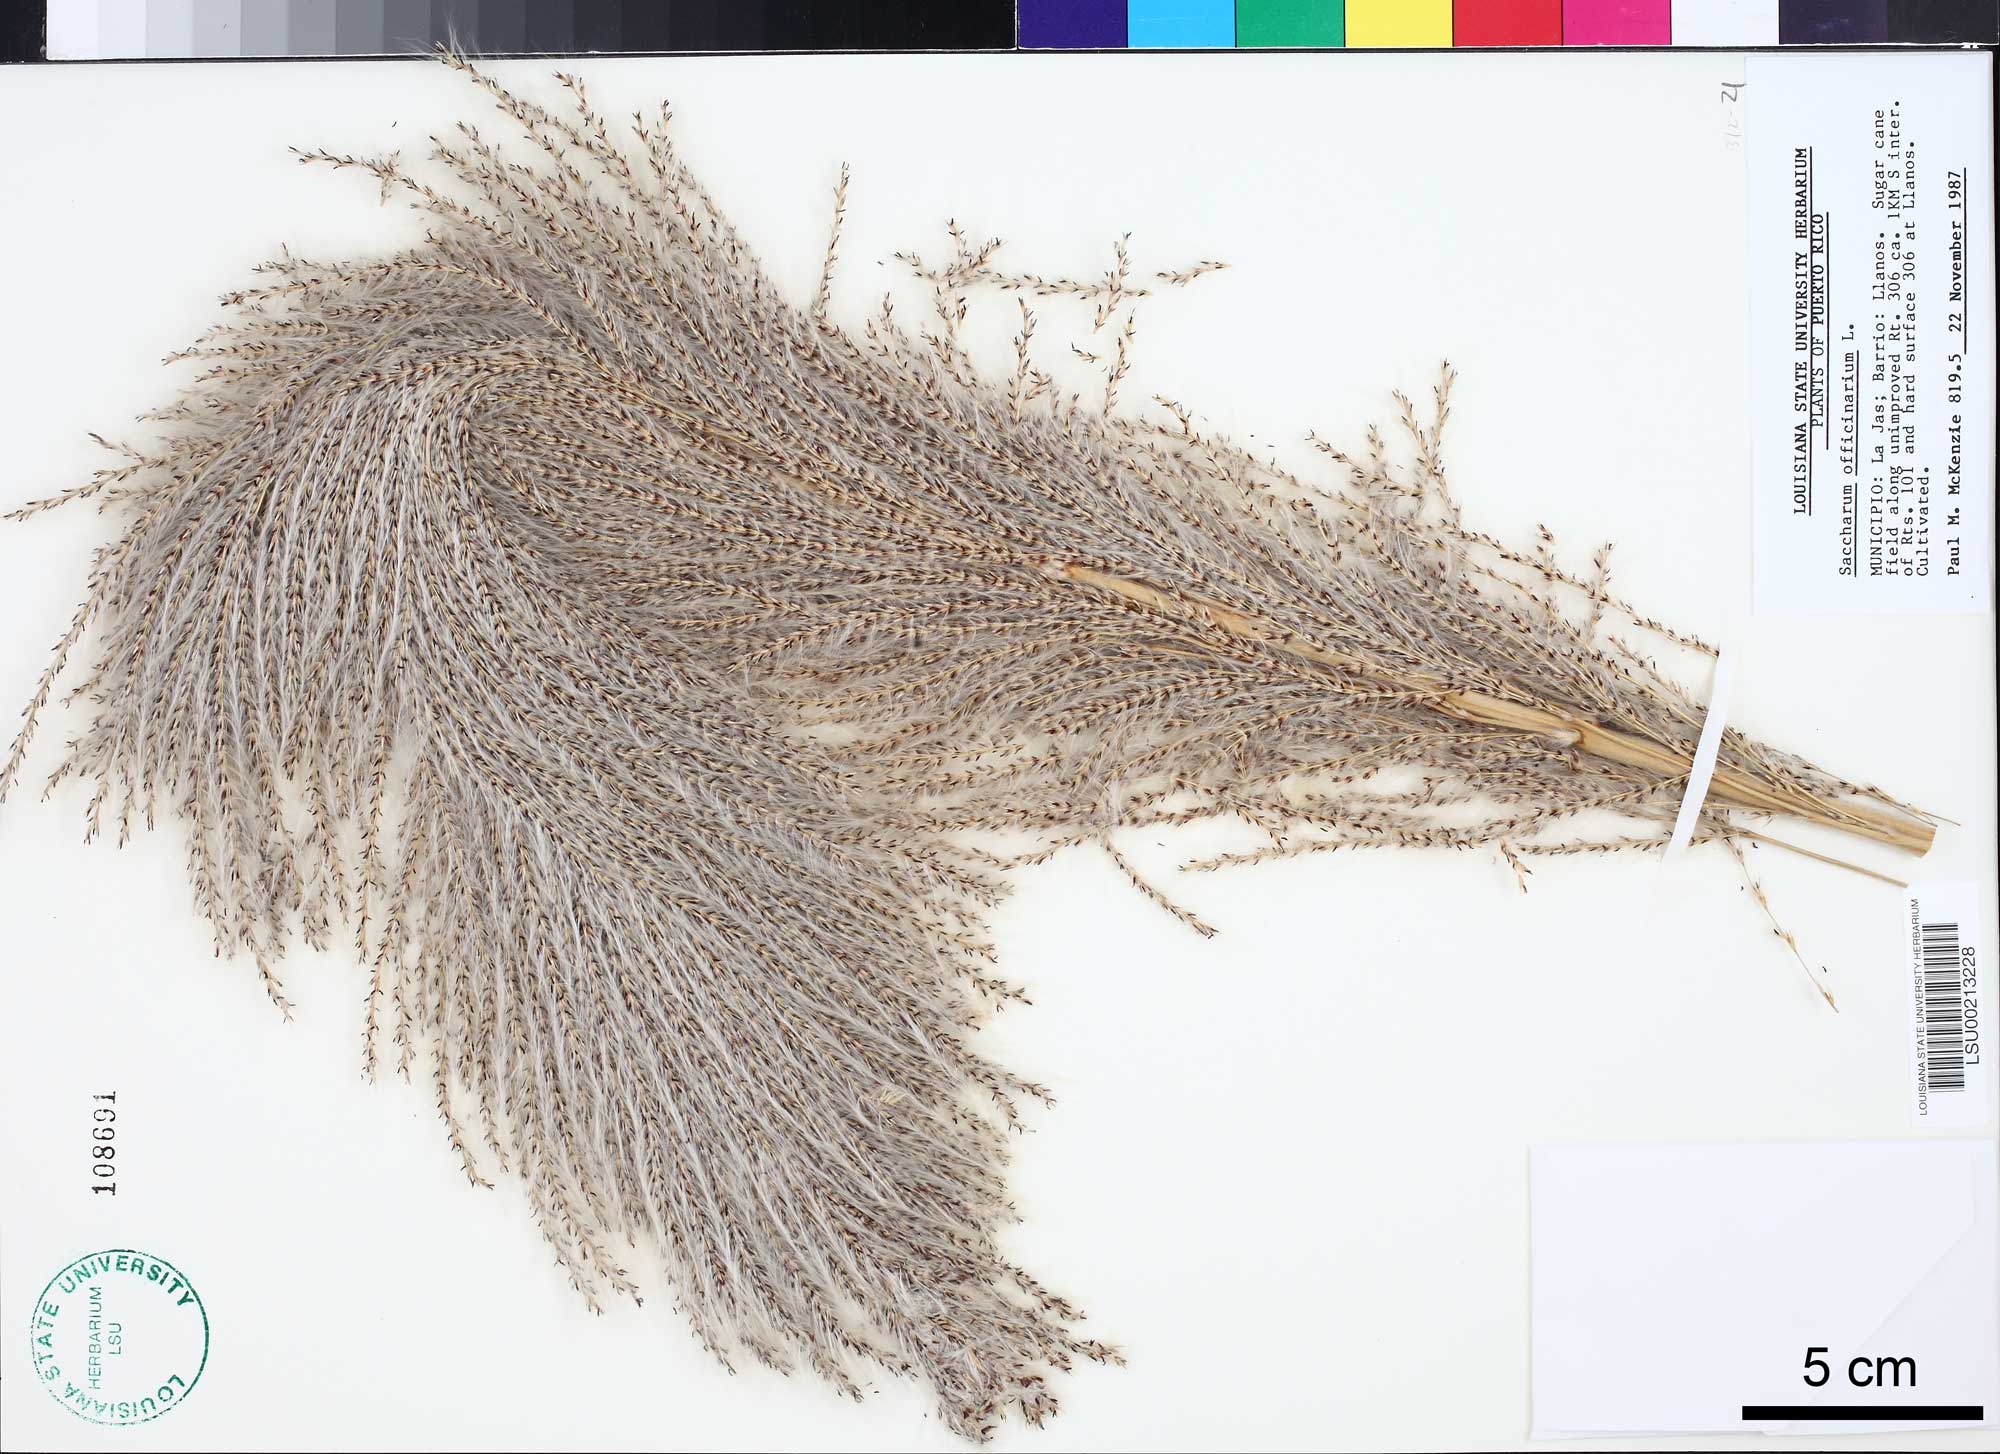 Photograph of a herbarium sheet of a sugarcane inflorescence. The inflorescence has a central stalk bearing many delicate branches with feathery hairs. The inflorescence is longer than the herbarium sheet, so in has been folded over to fit.